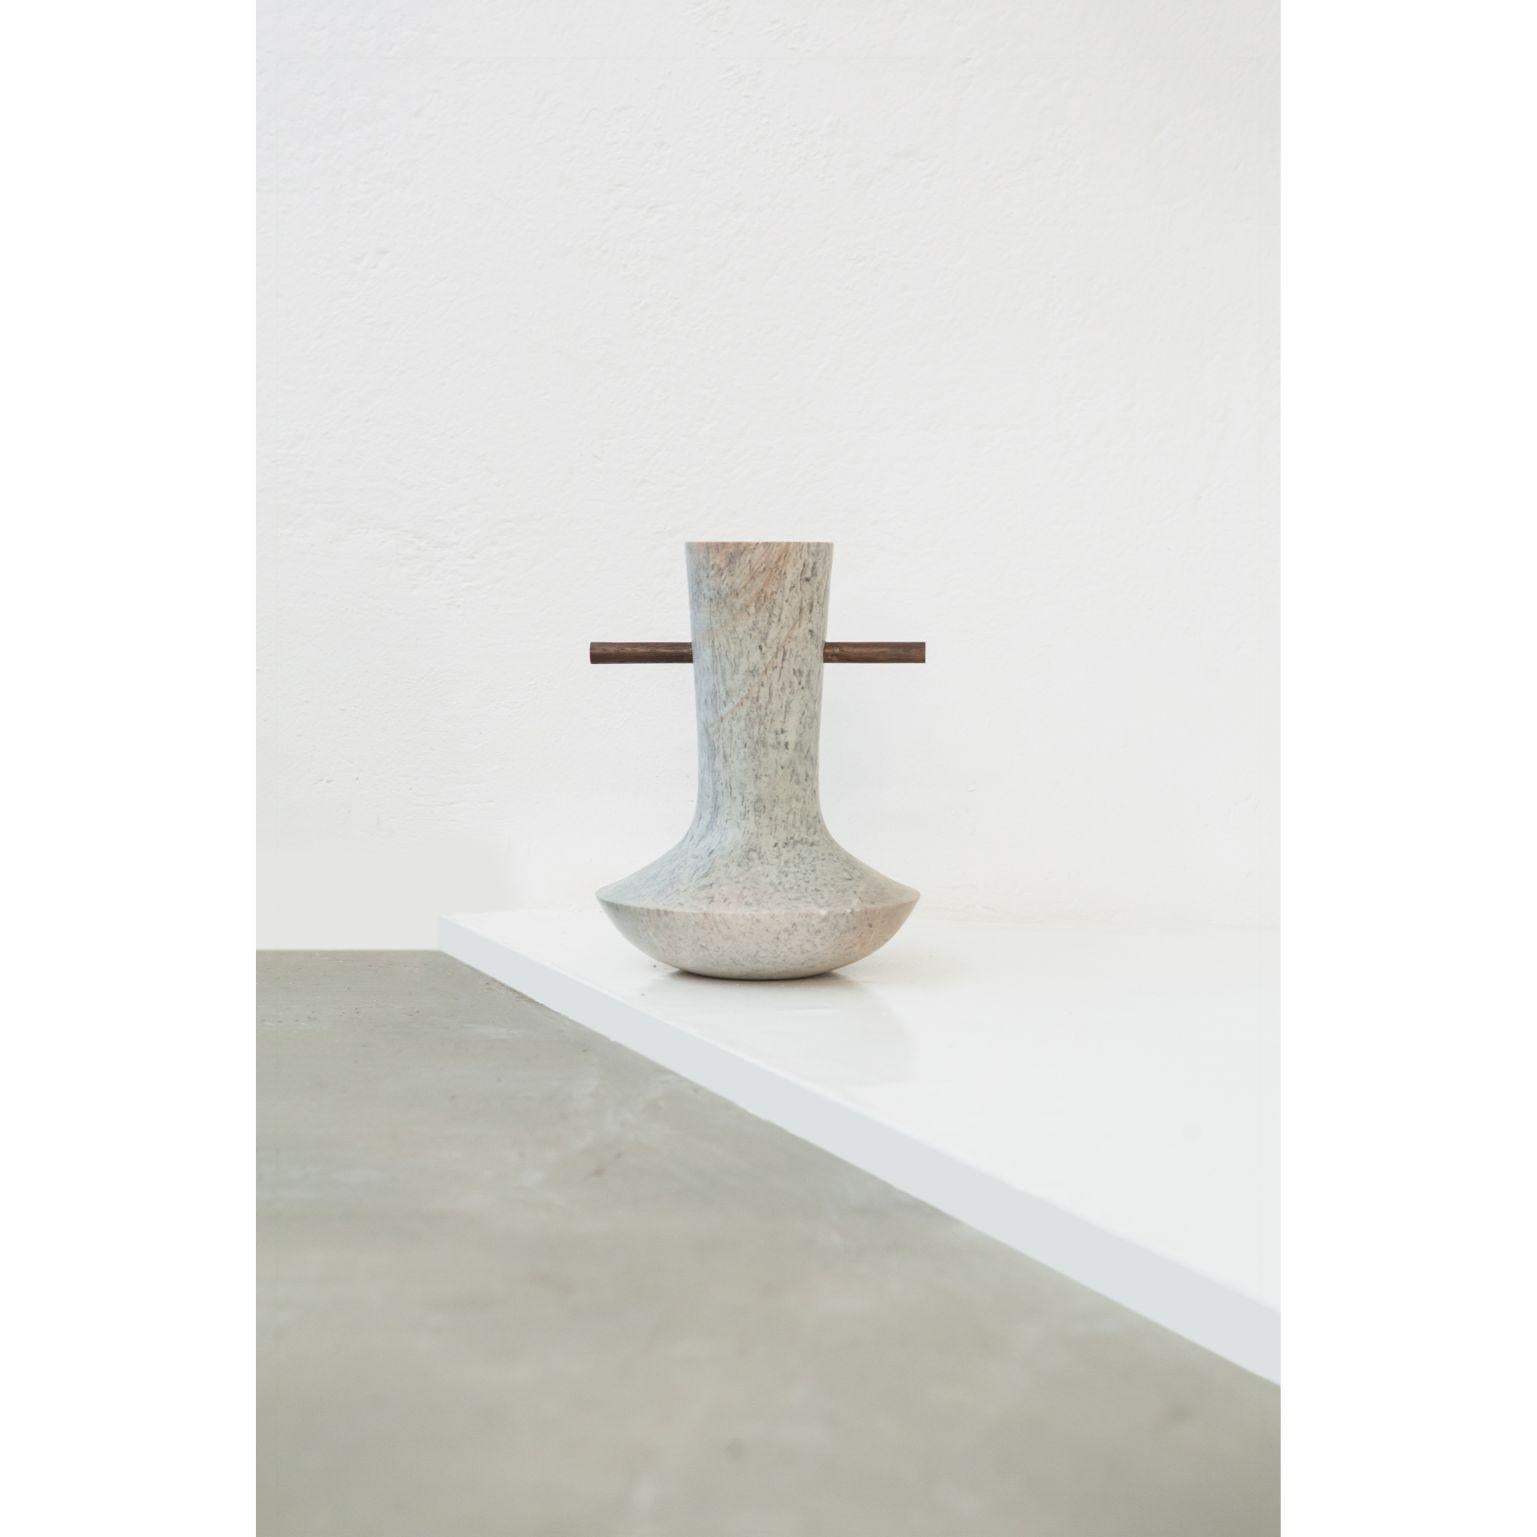 Ita 3 - Soapstone vase by Alva Design
Materials: Soapstone, solid wood,
Dimensions: 24 (Ø) x 32 (H)

ALVA is a furniture and objects design office, formed by brothers Susana Bastos, artist and designer, and Marcelo Alvarenga, architect. Their